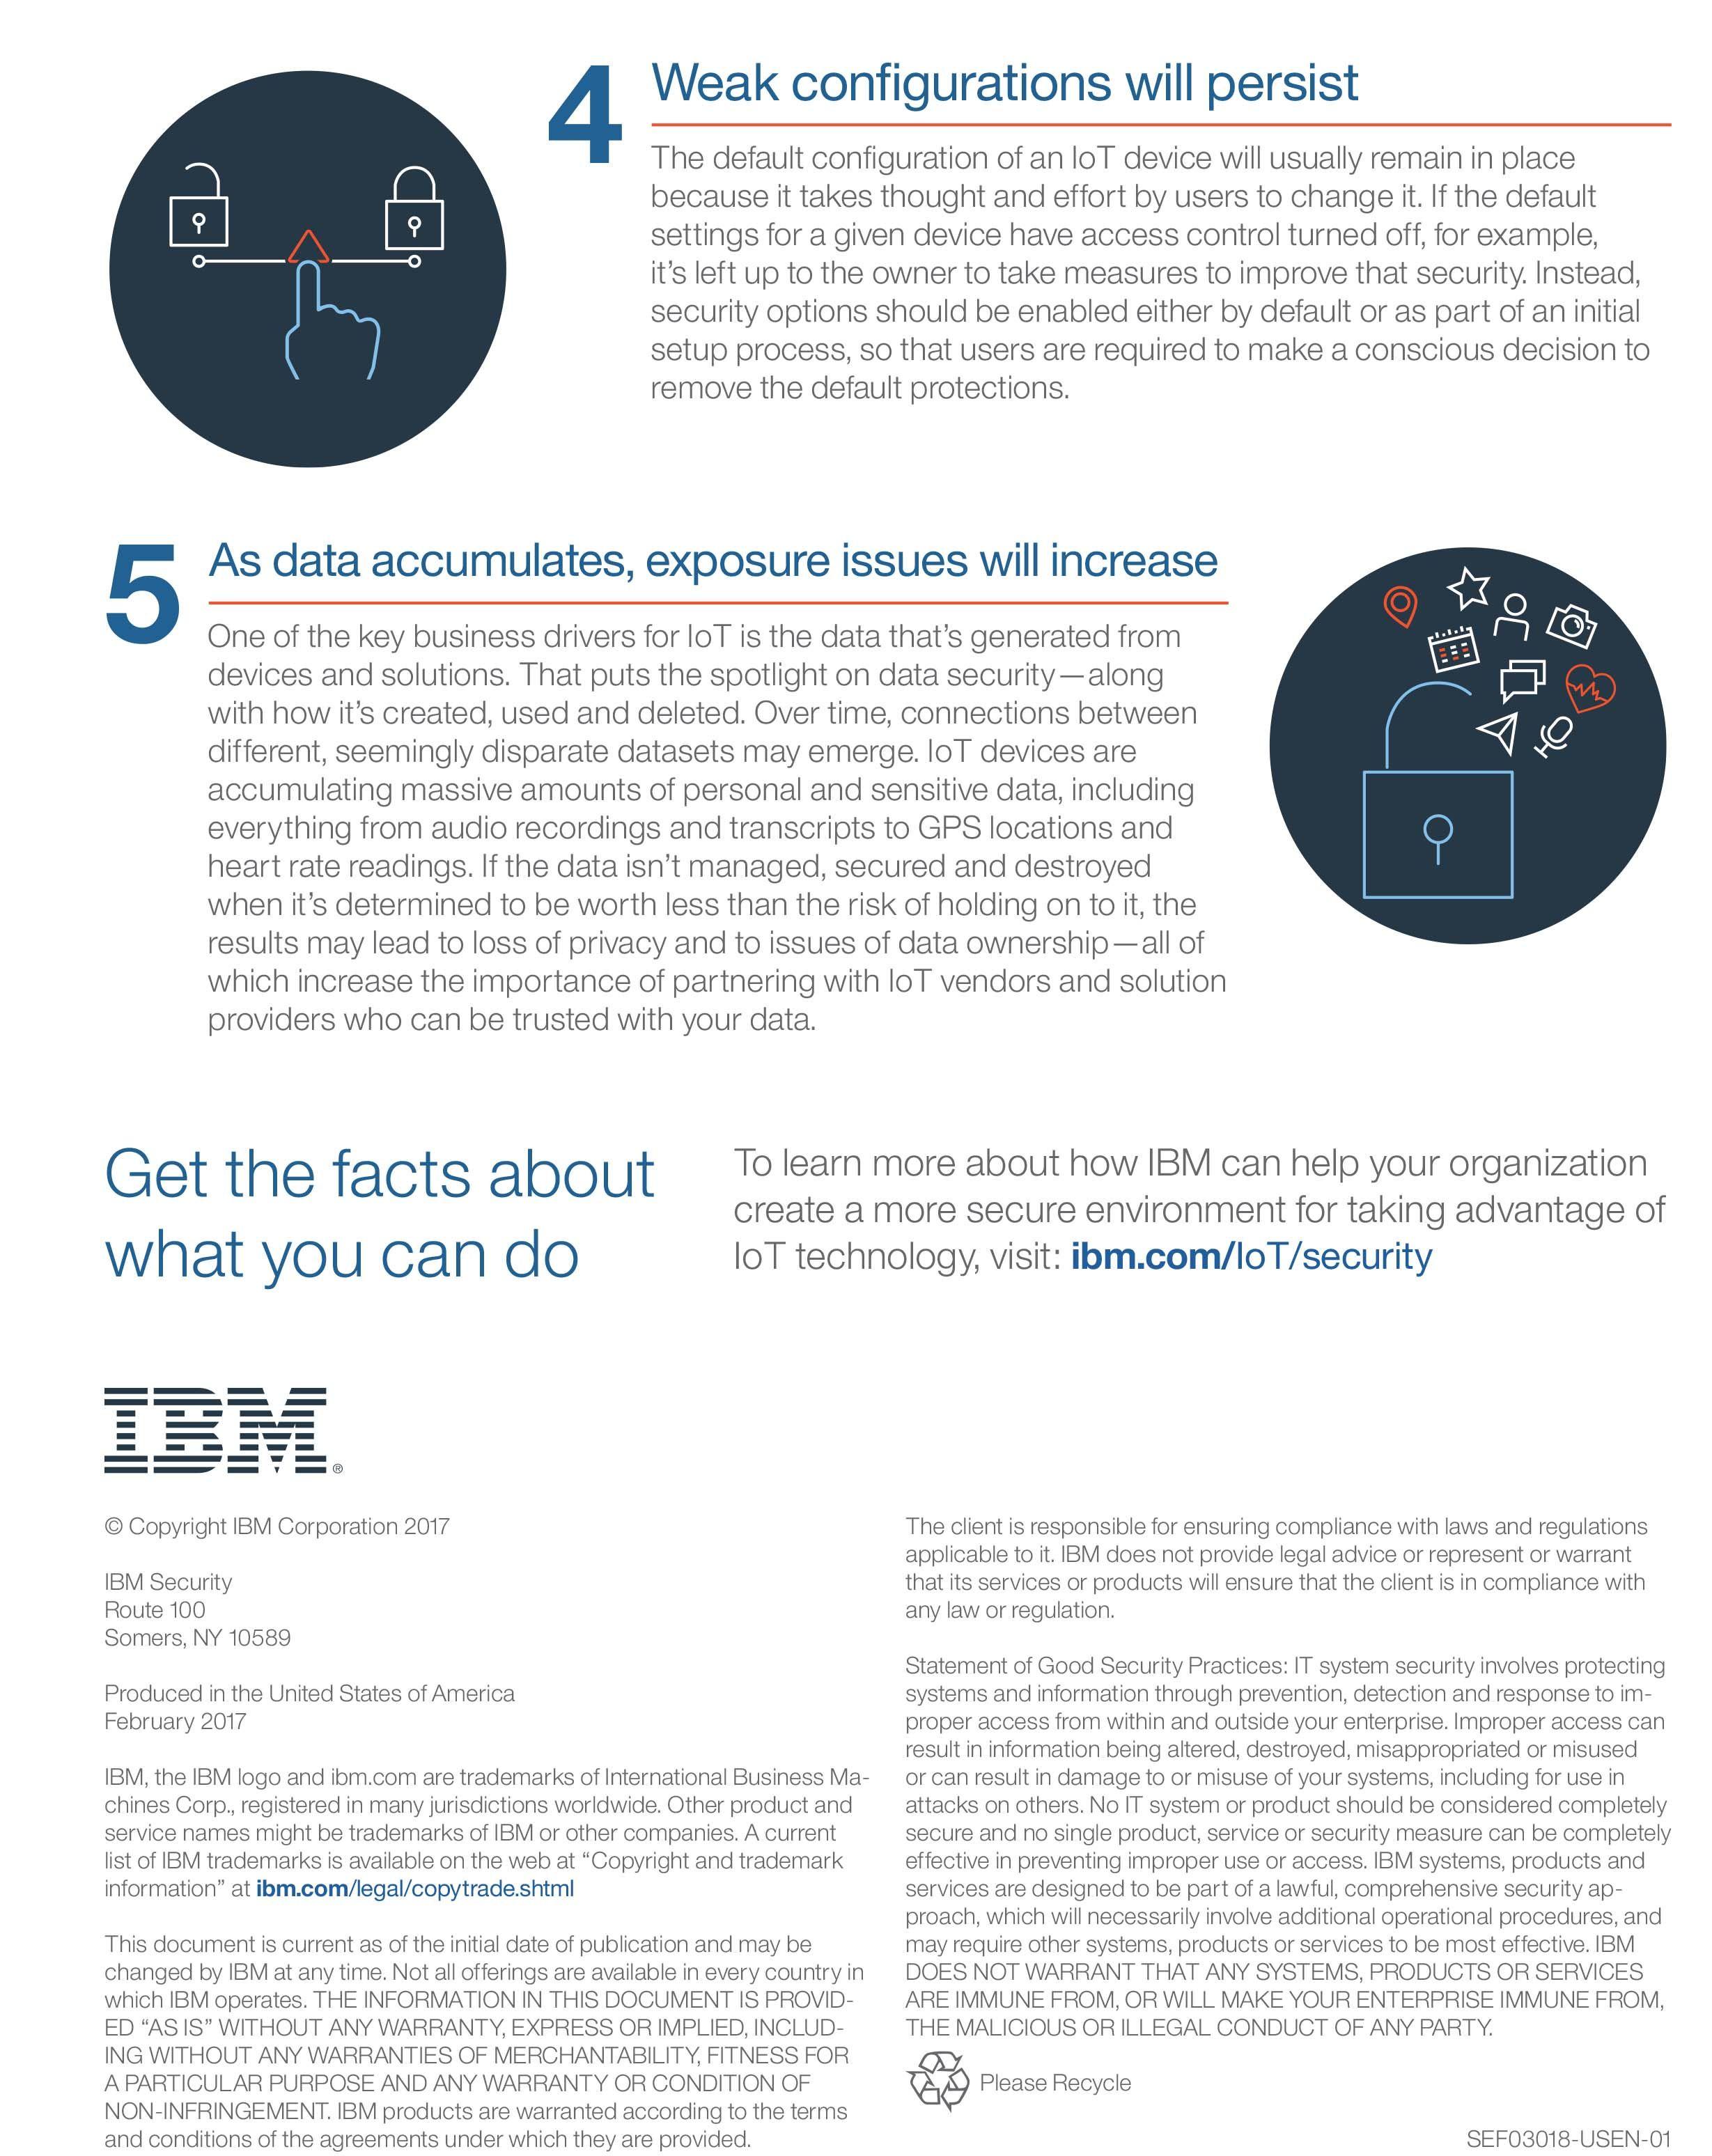 Current IBM Logo - Inforgraphic cyber security.jpg p2 - Internet of Things blog